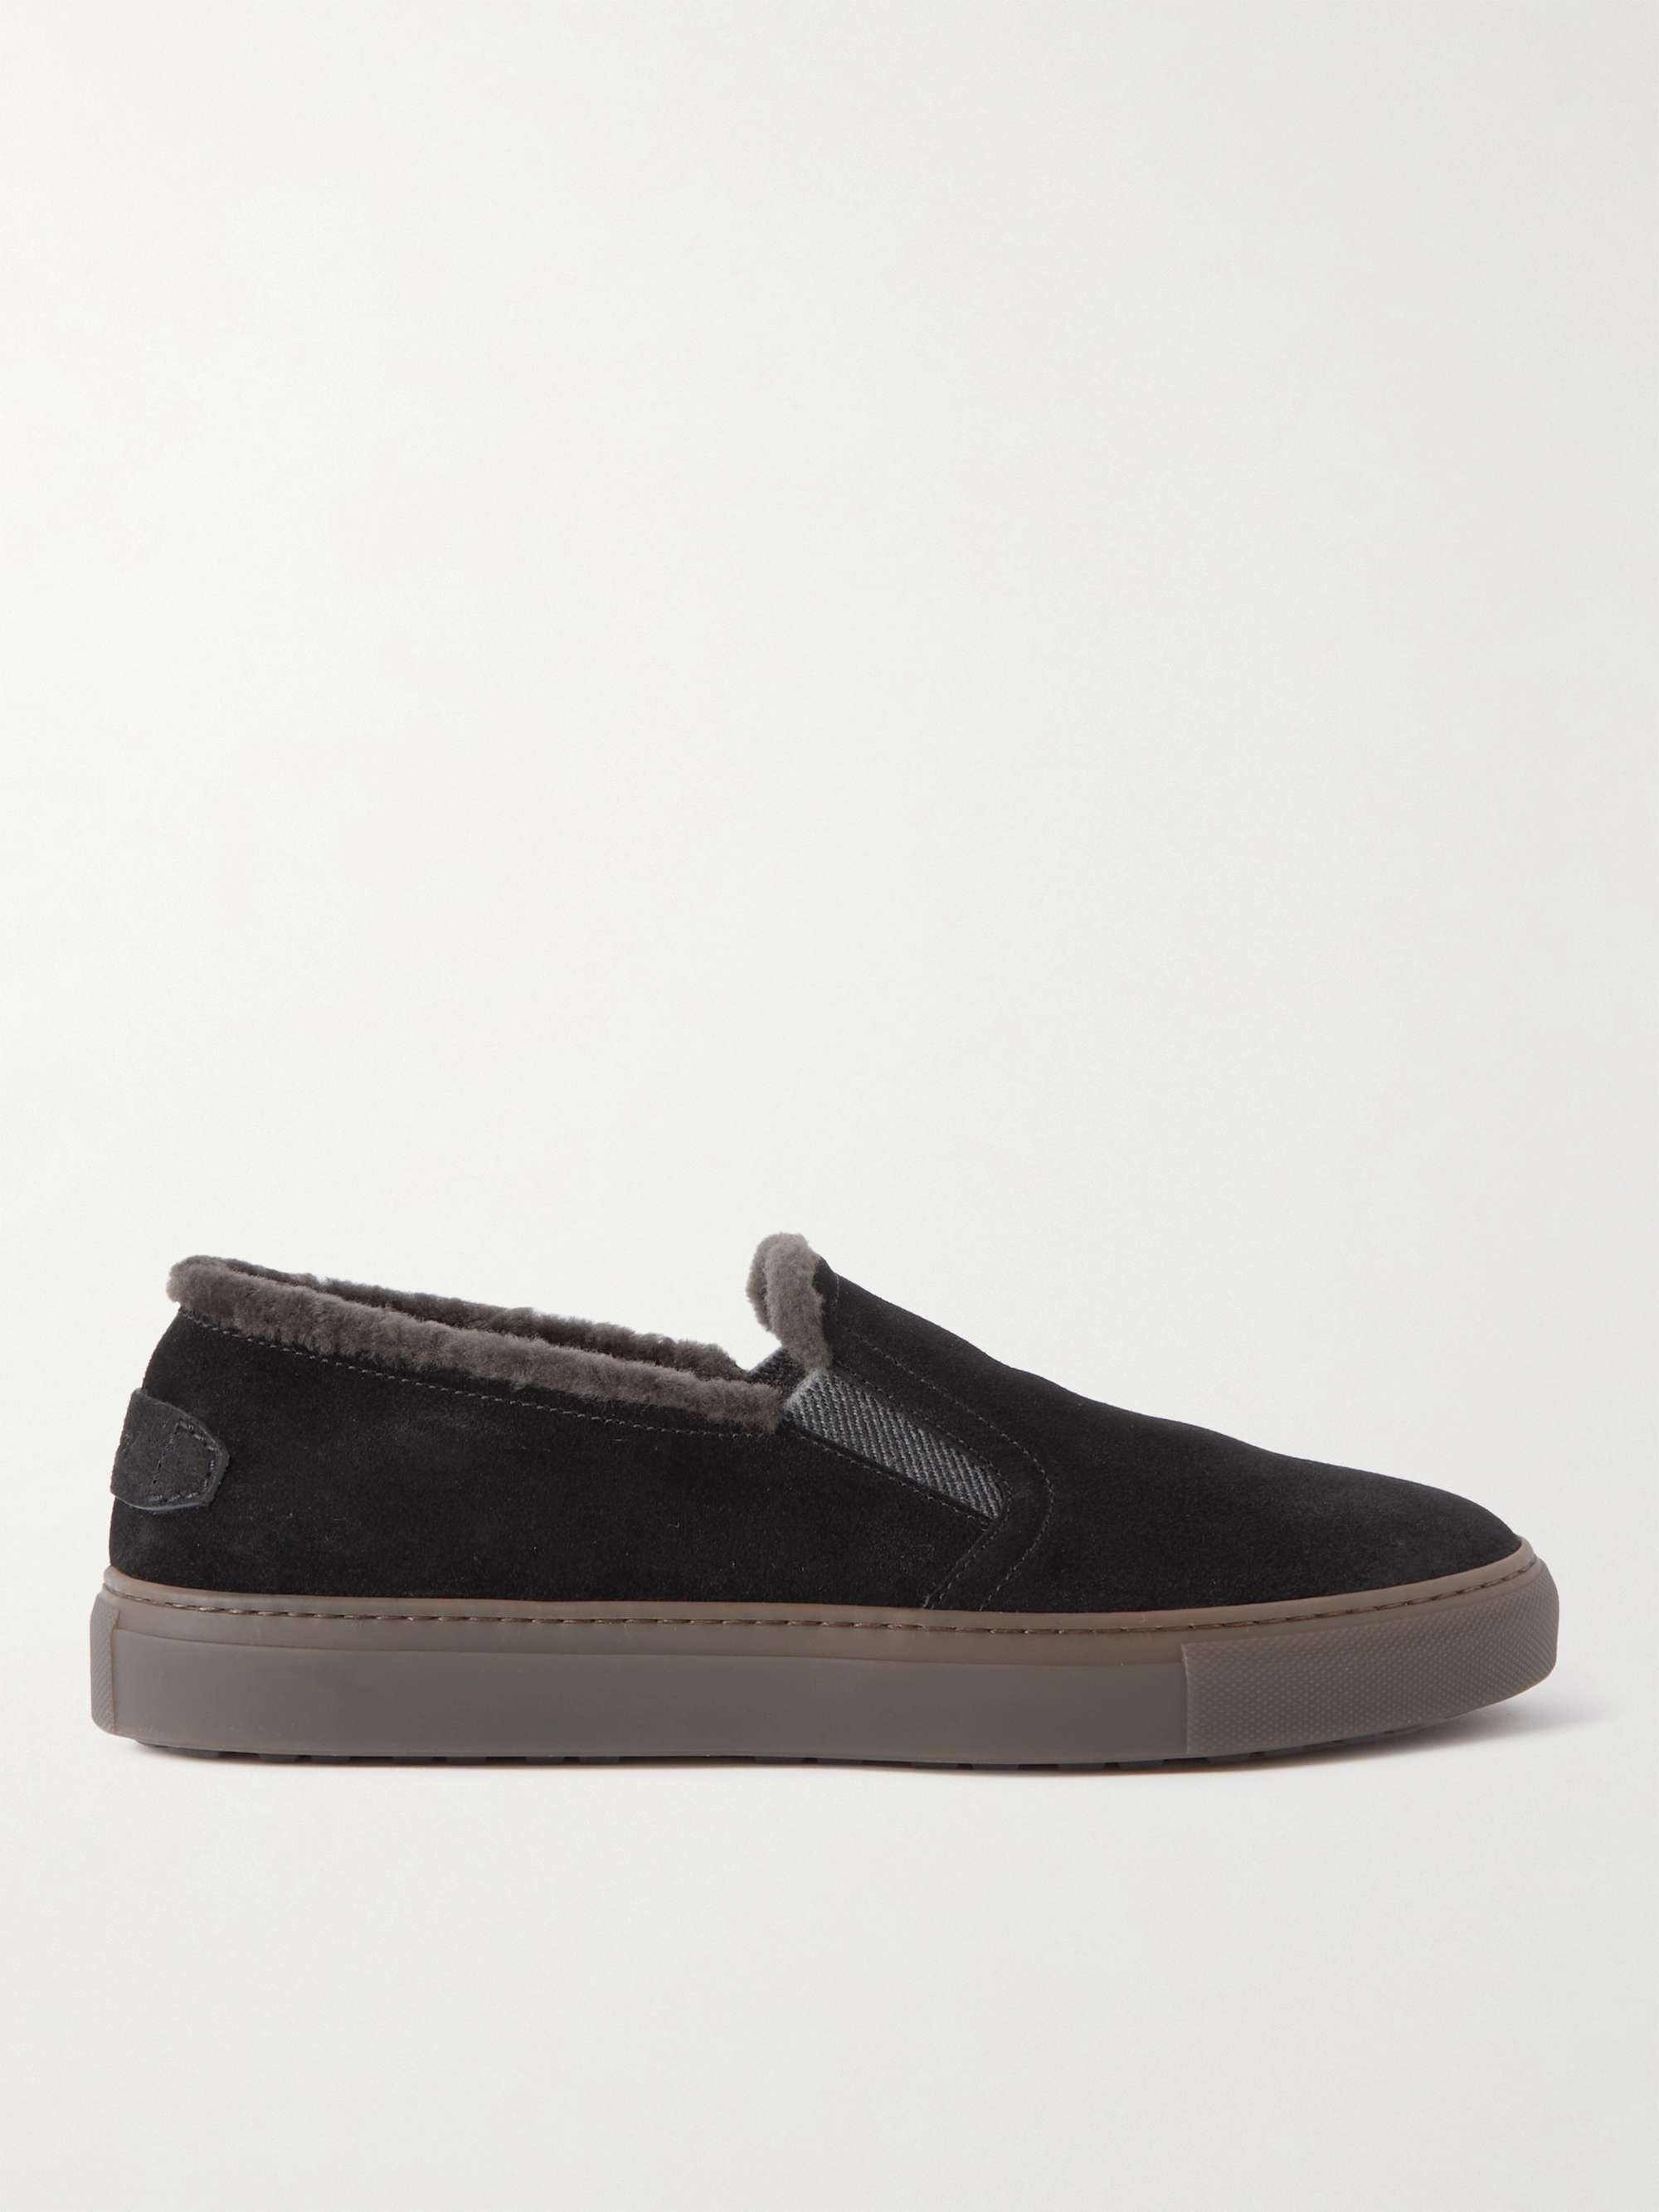 BRIONI Shearling-Lined Suede Slip-On Sneakers | MR PORTER